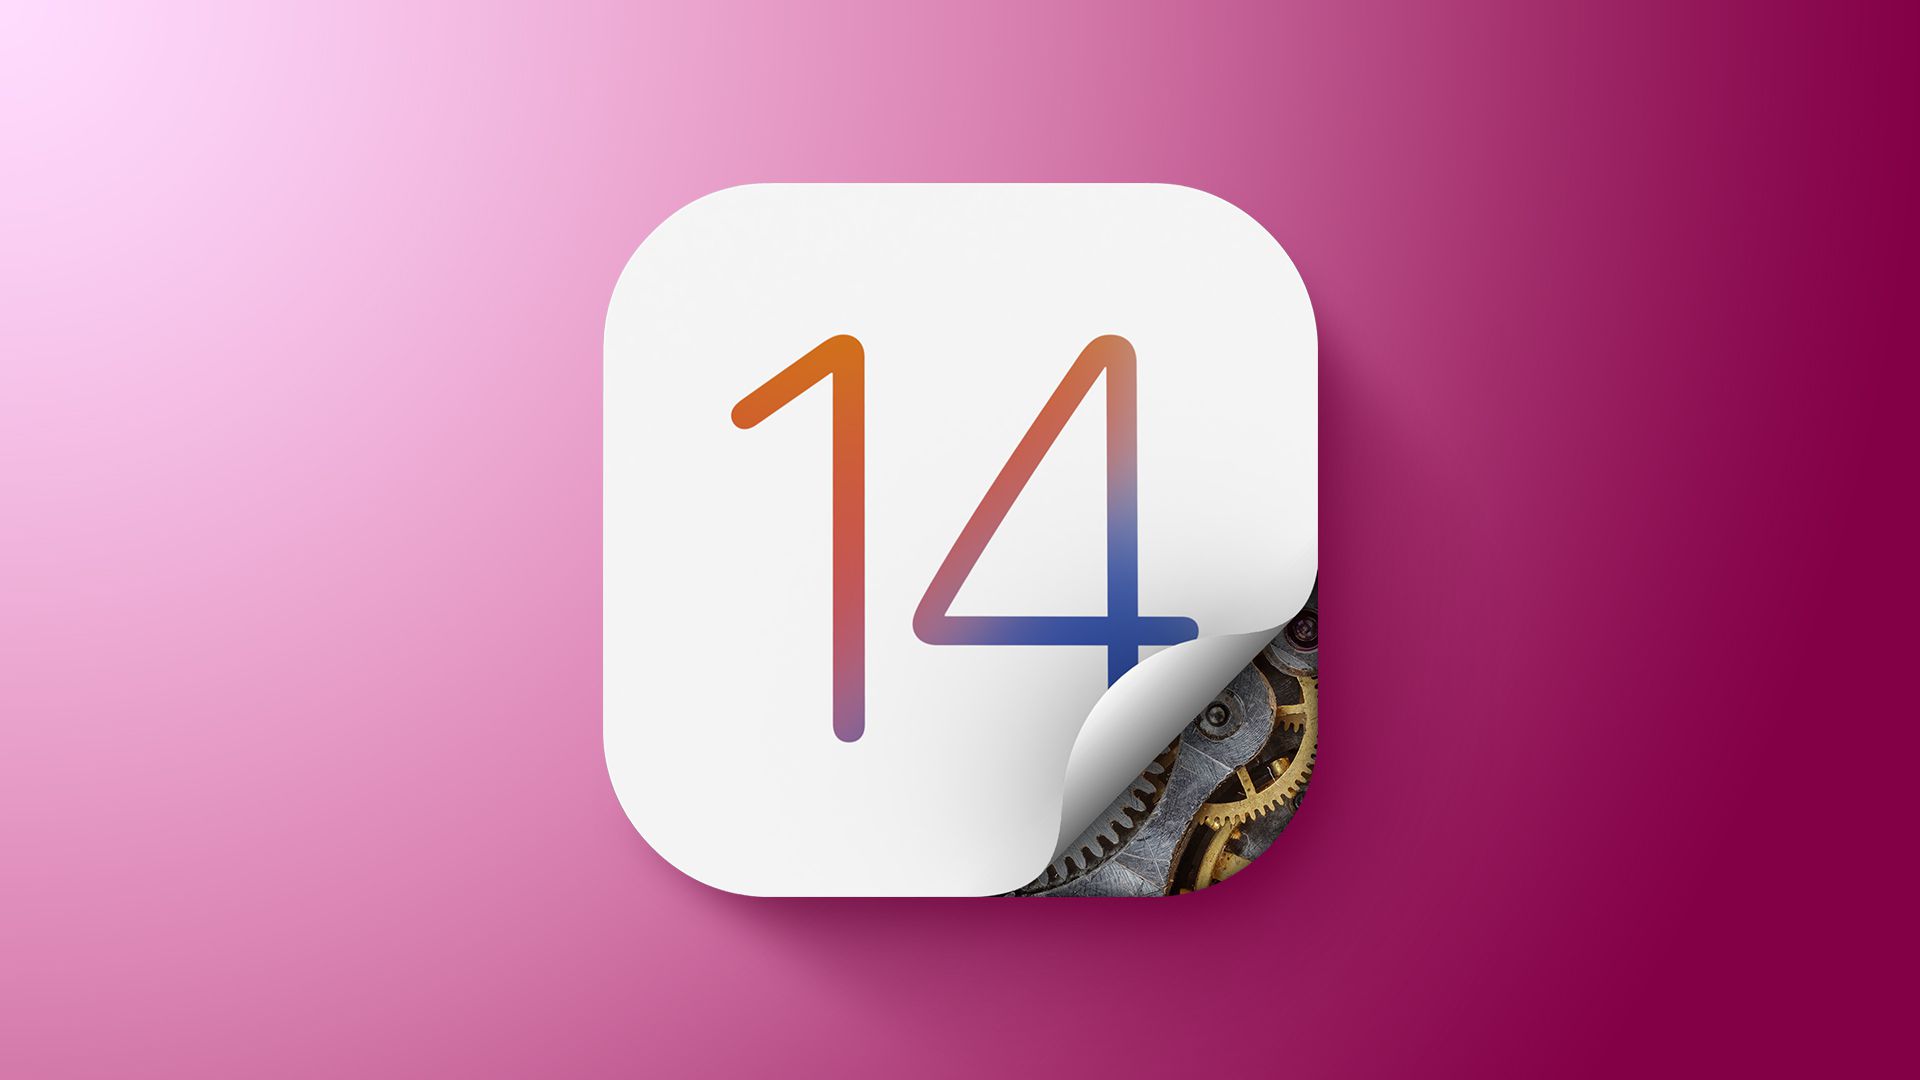 iOS 14: A Quick Tour of All the New Features - MacRumors